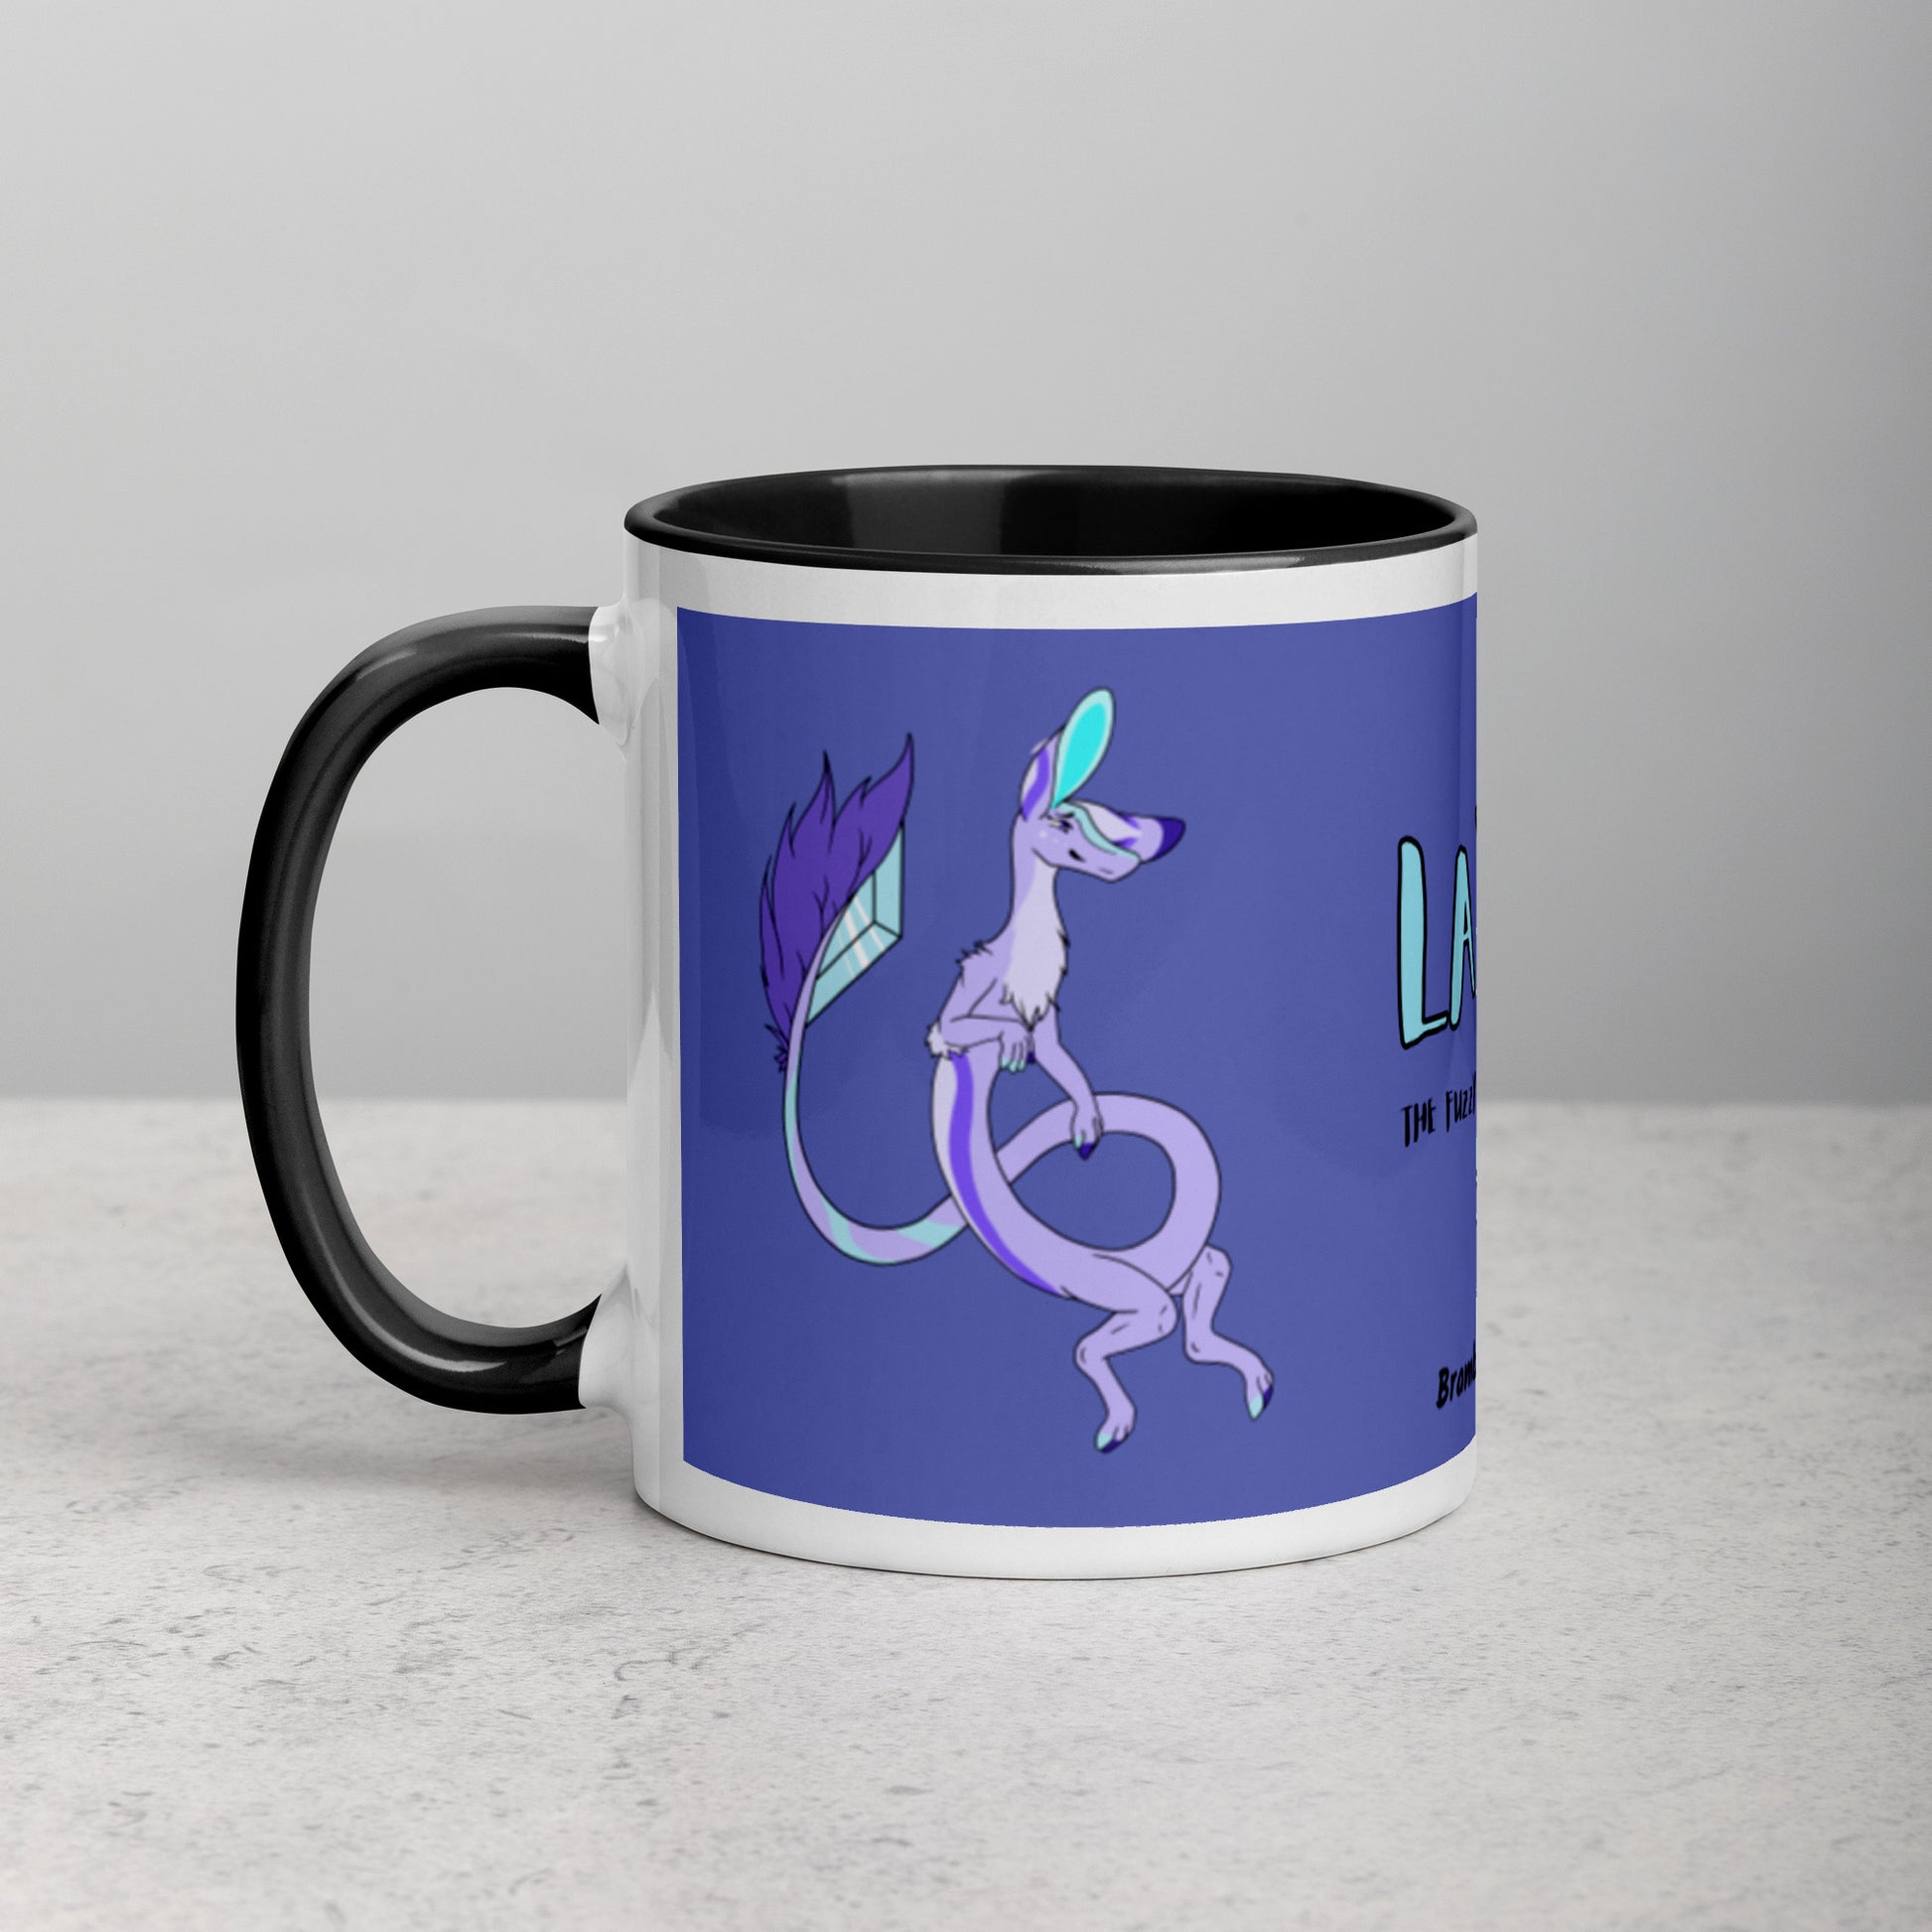 11 ounce white ceramic mug. Black inside and handle. Features double-sided image of Layla the Lavender Fuzzy Noodle Dragon. Shown on tabletop.